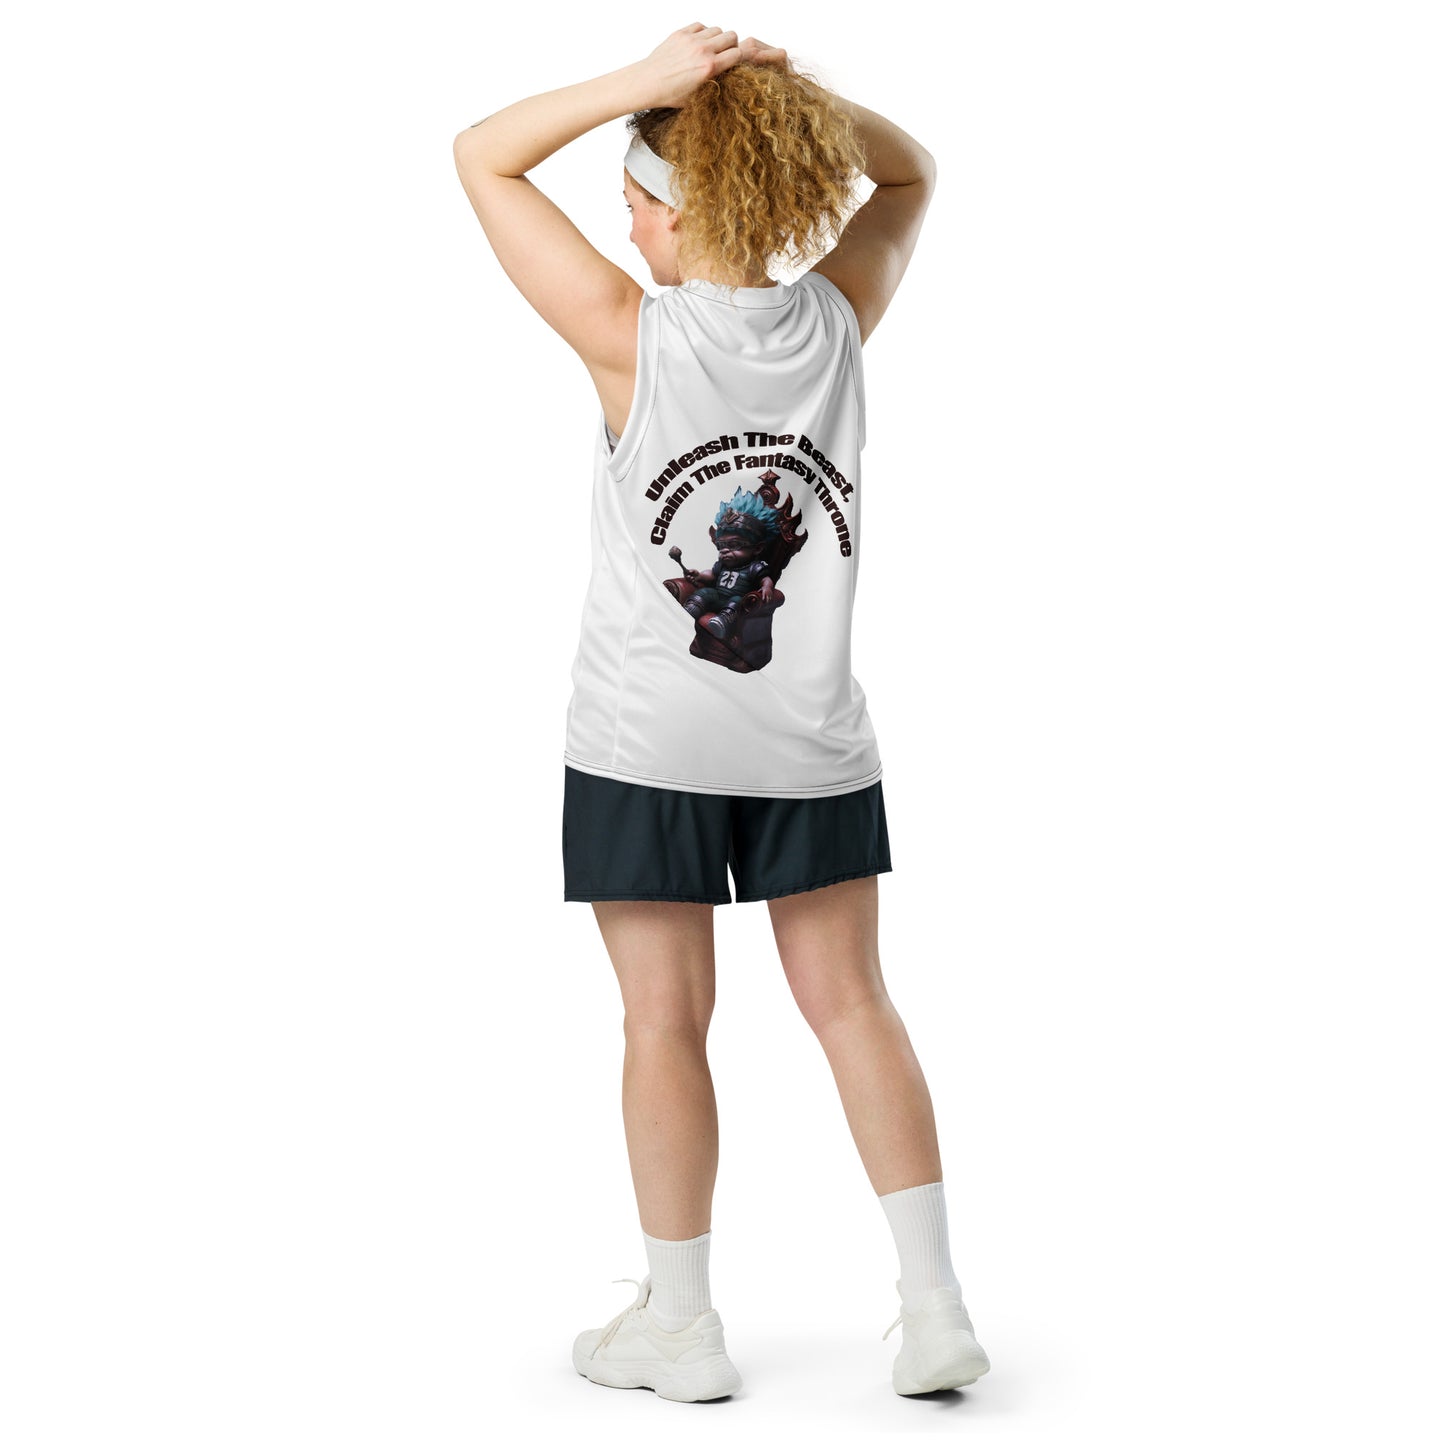 Gridiron King Recycled unisex basketball jersey